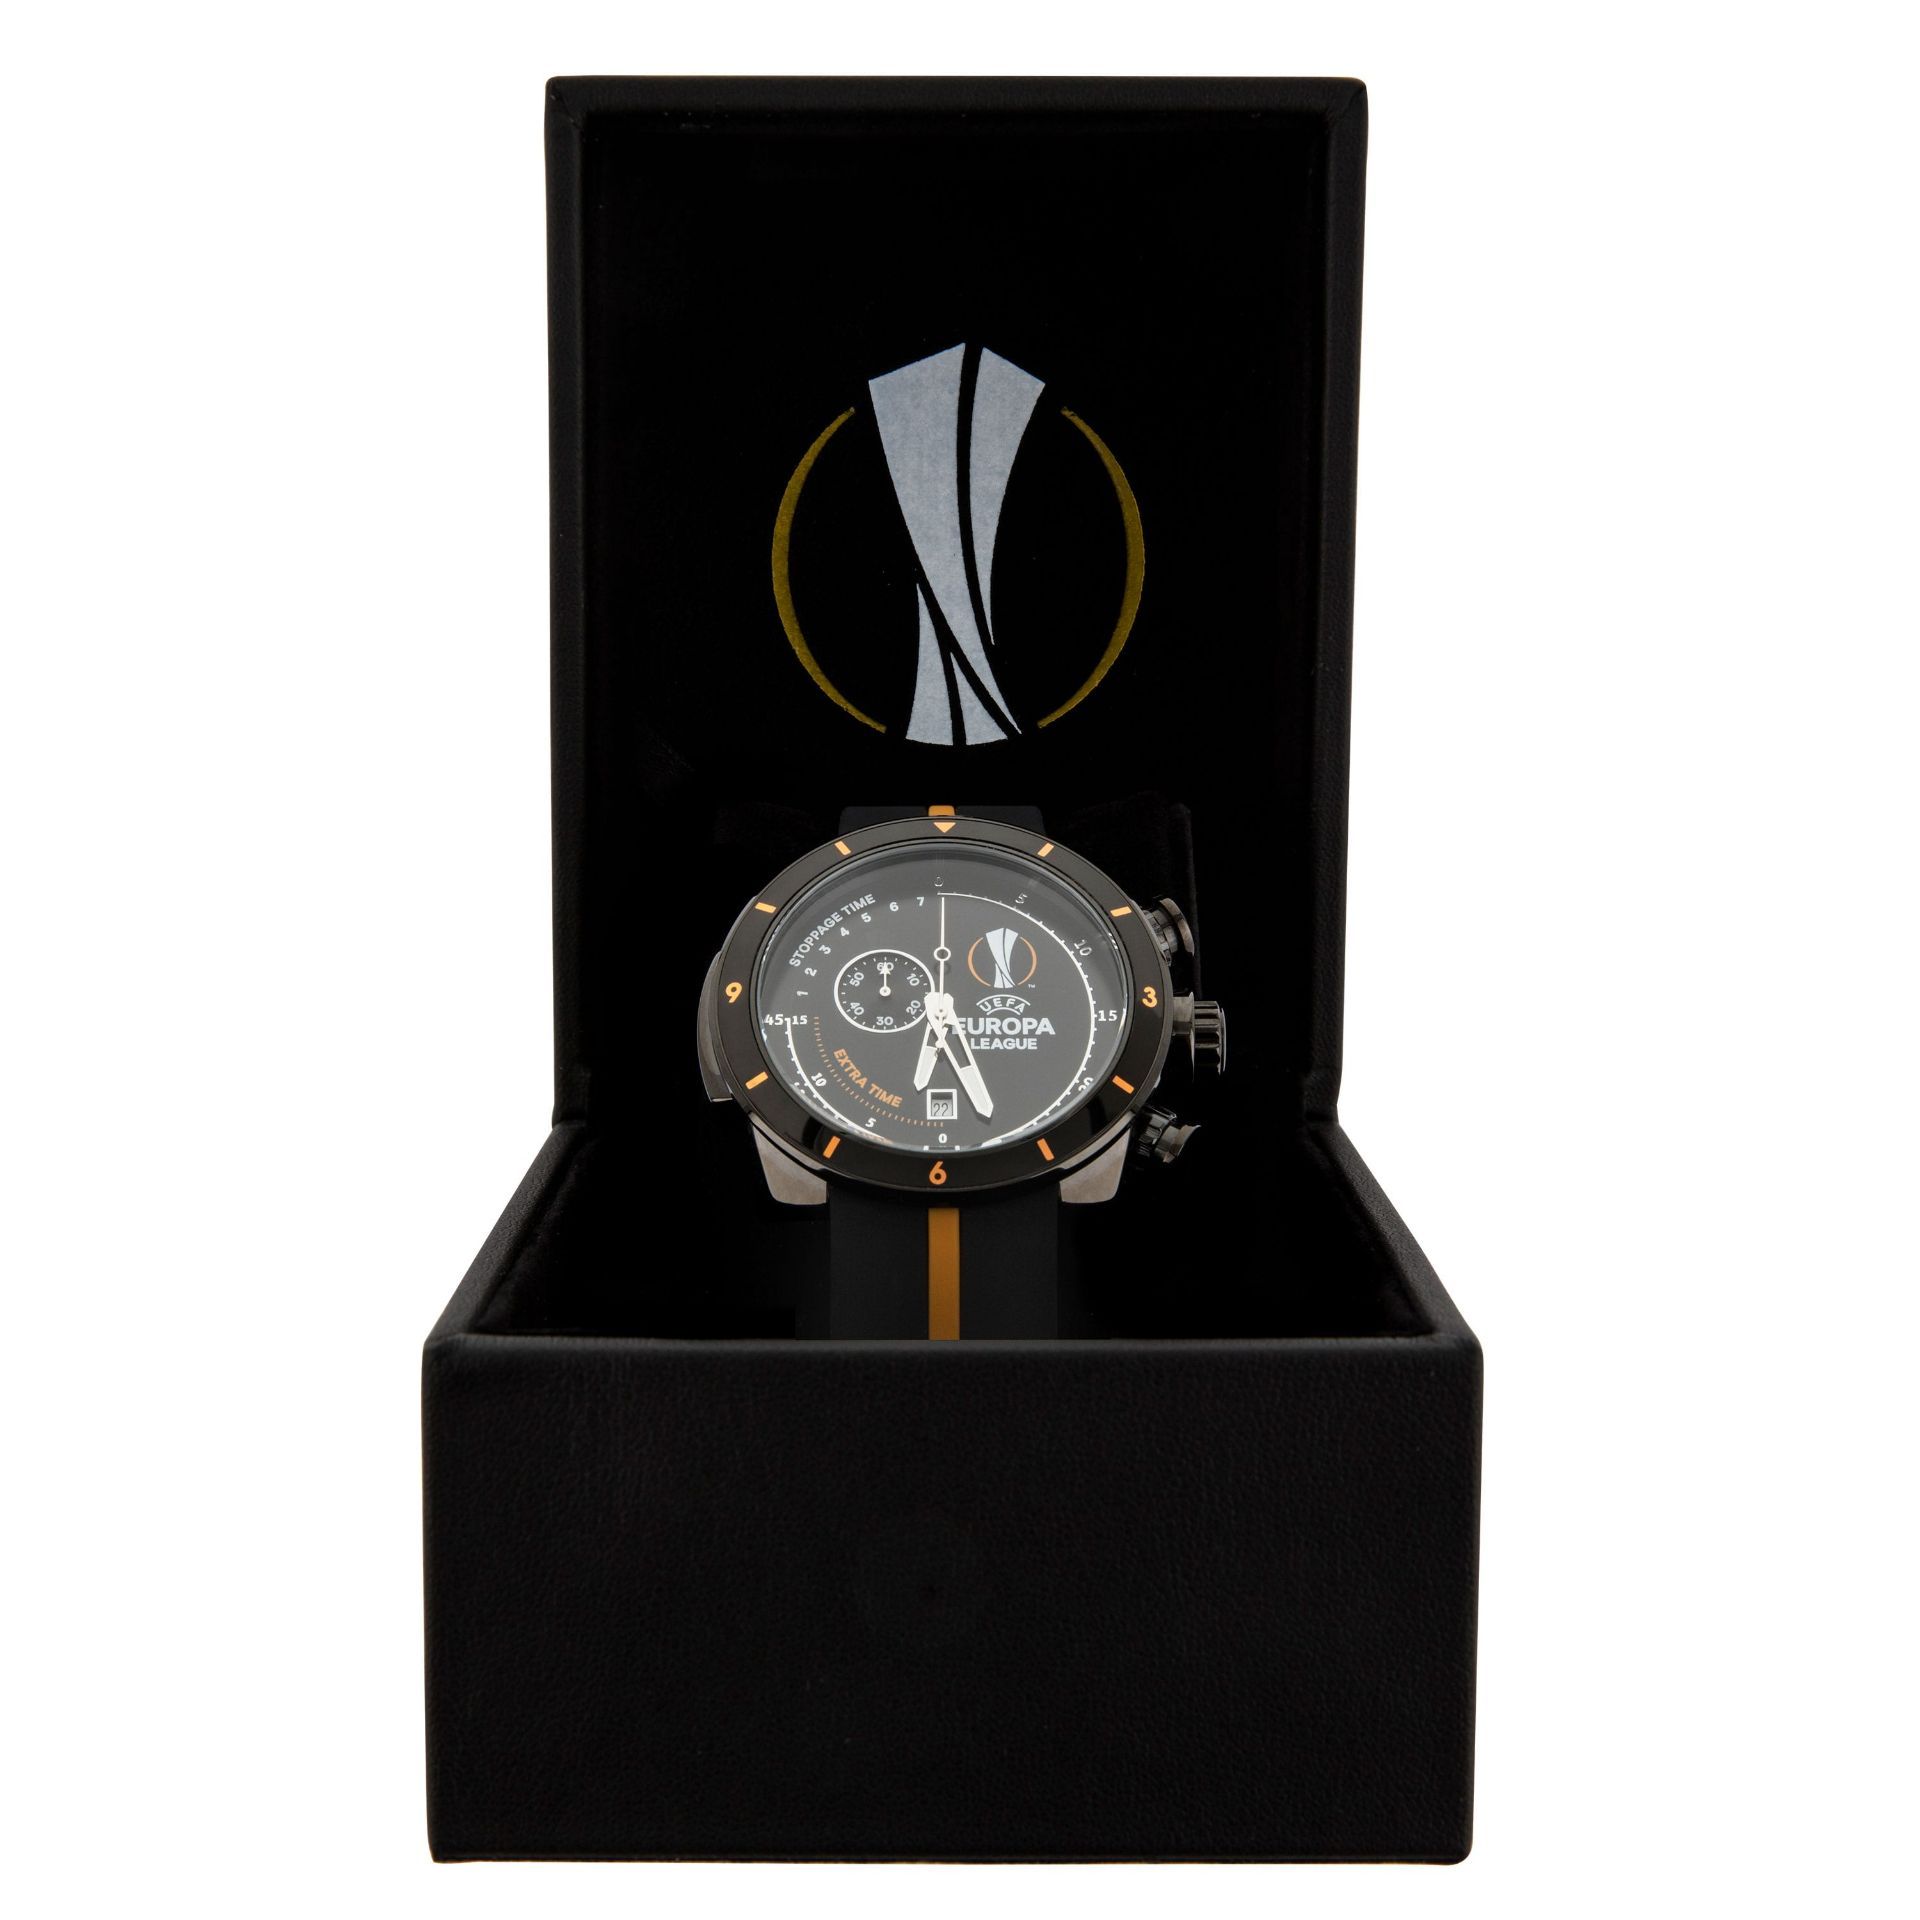 BRAND NEW OFFICIAL UEFA EUROPA LEAGUE 45 MINUTES COUNTDOWN WATCH EL45-BLKB-BLORP, RRP £225 - Image 4 of 5